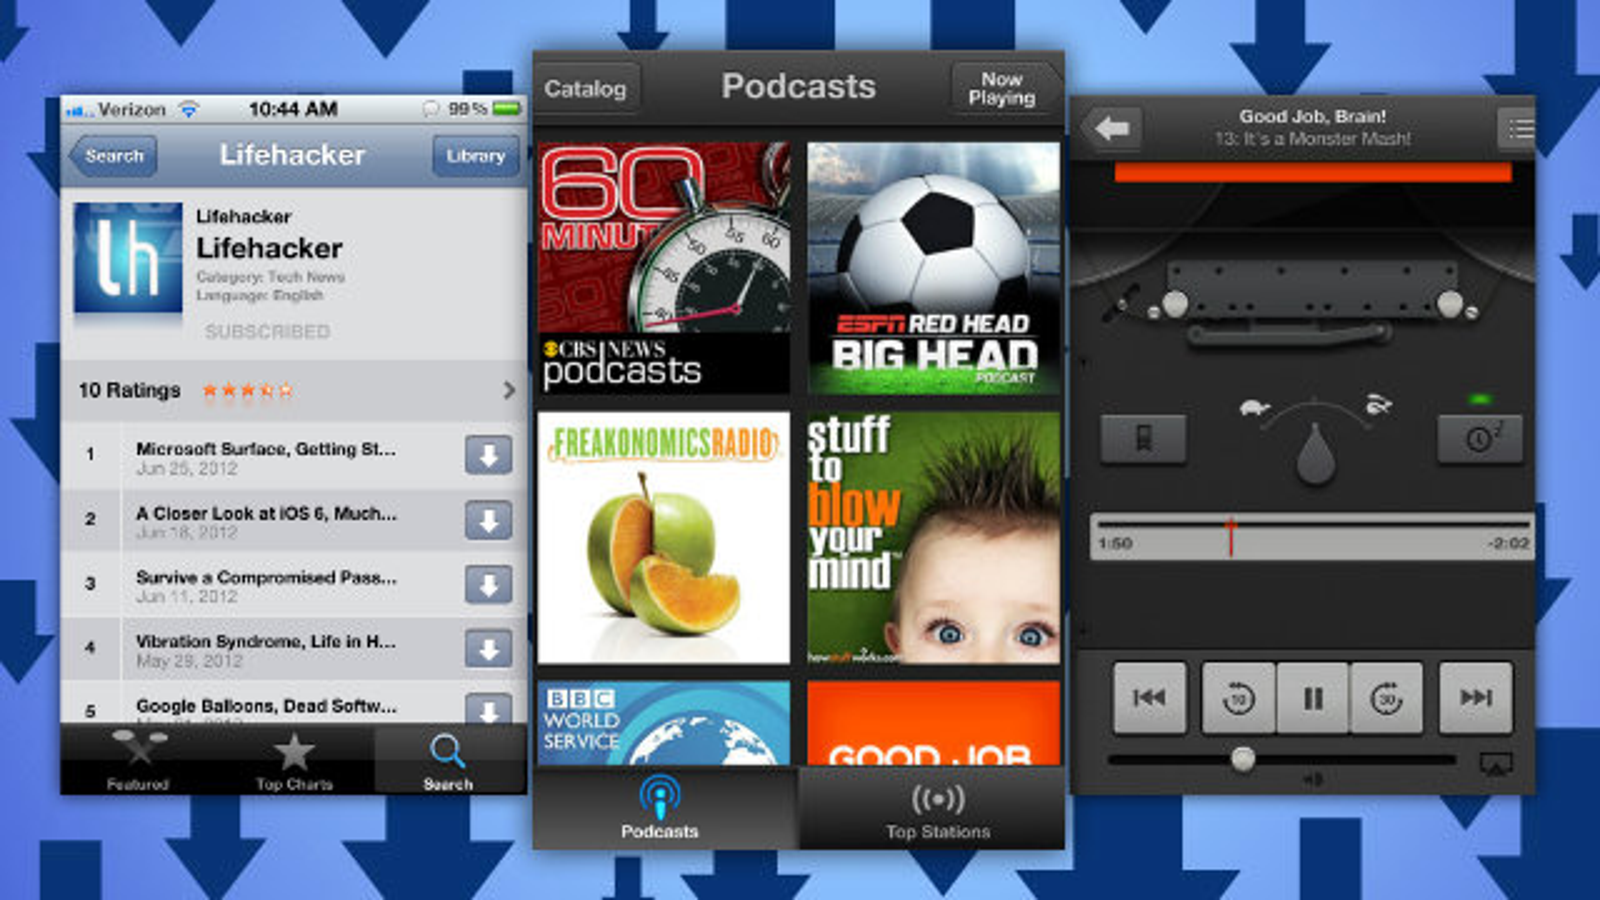 uDock for ios download free